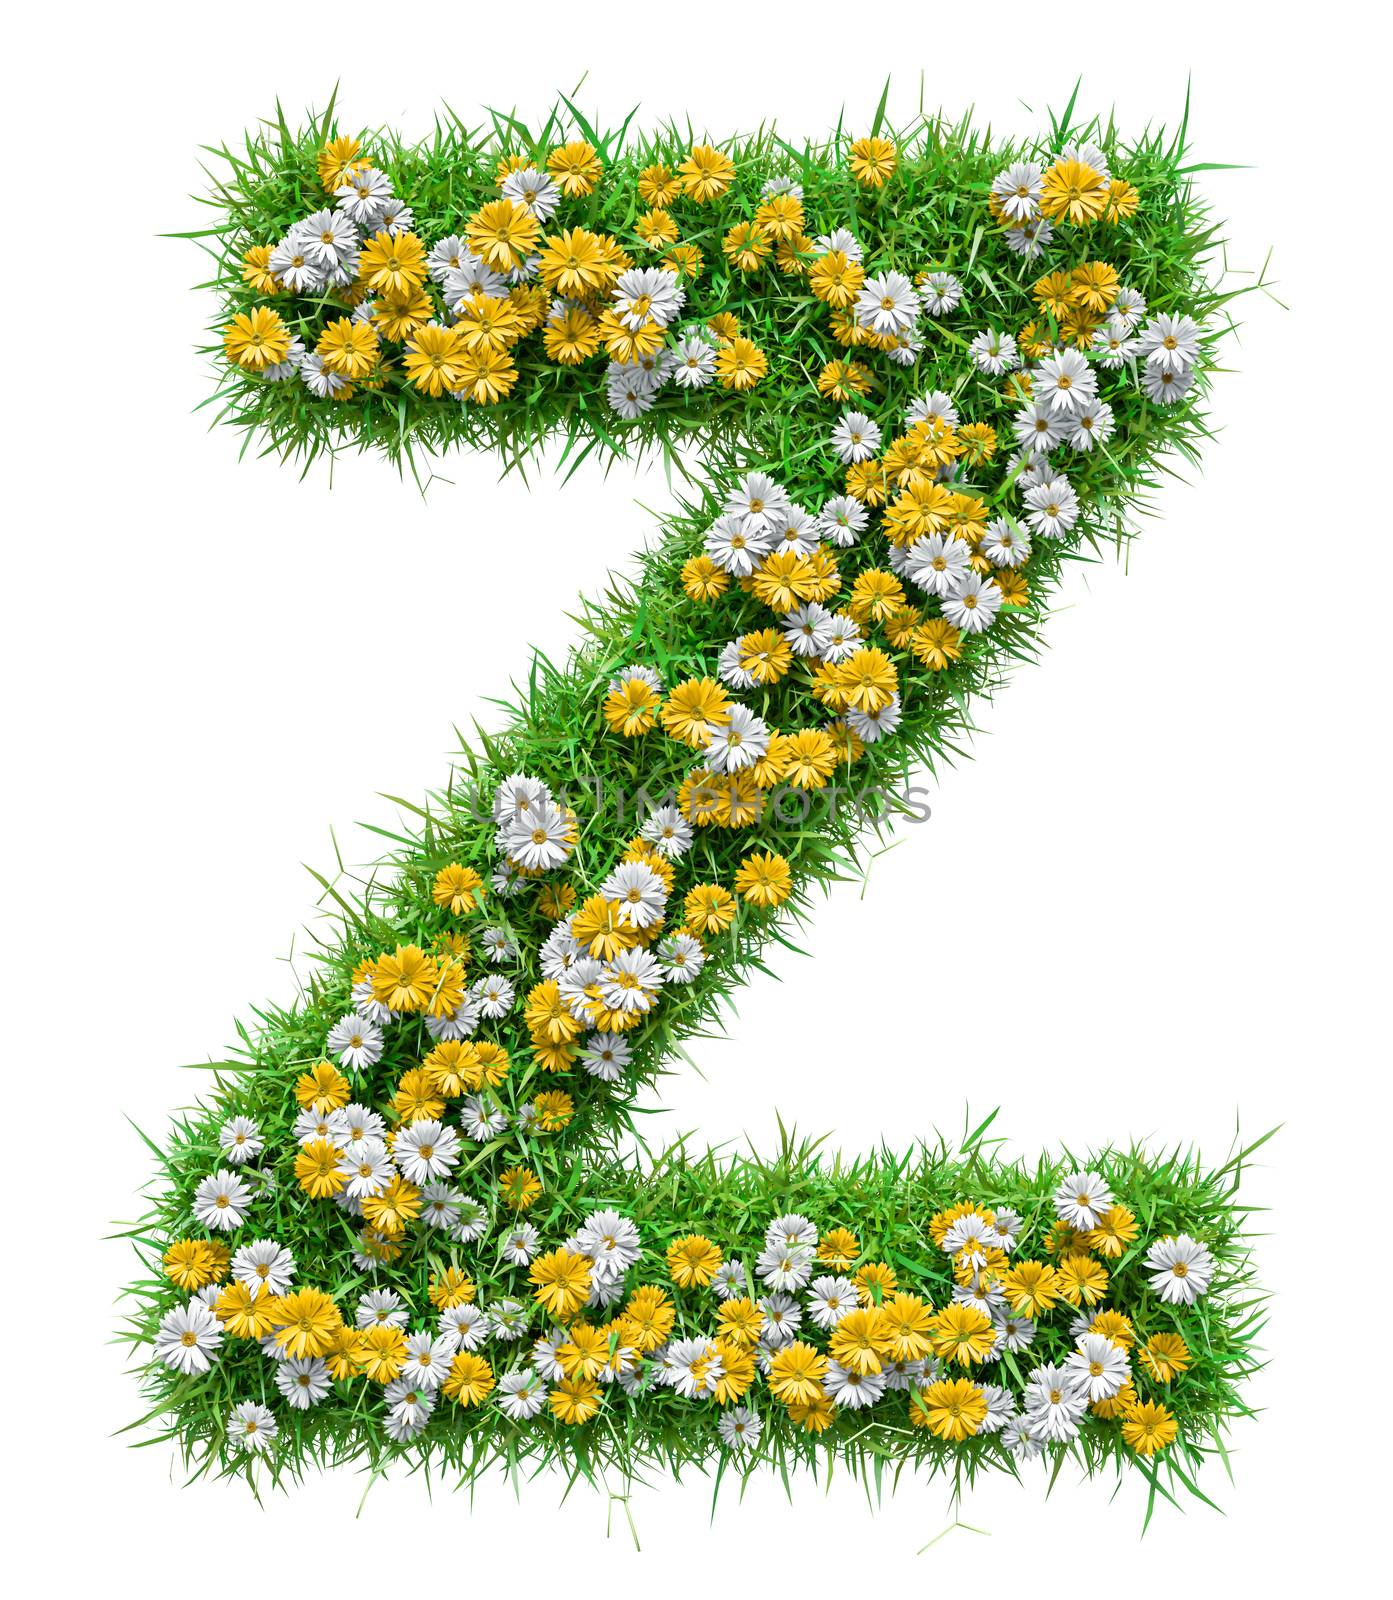 Letter Z Of Green Grass And Flowers by cherezoff